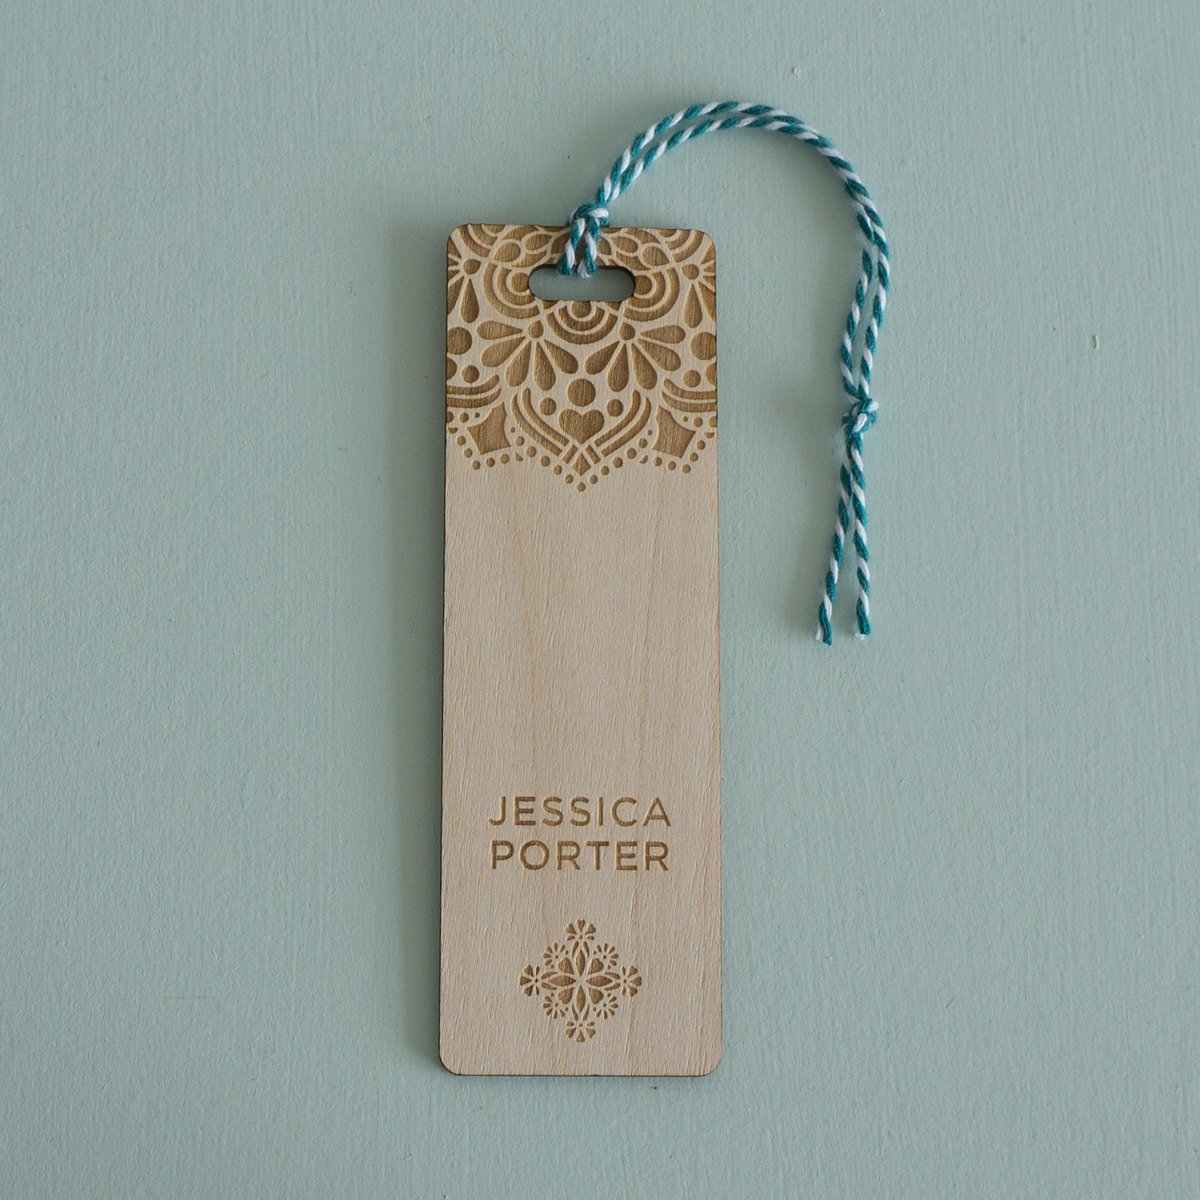 Personalised bookmarks make that perfect unique gift experience Belvedere Collections